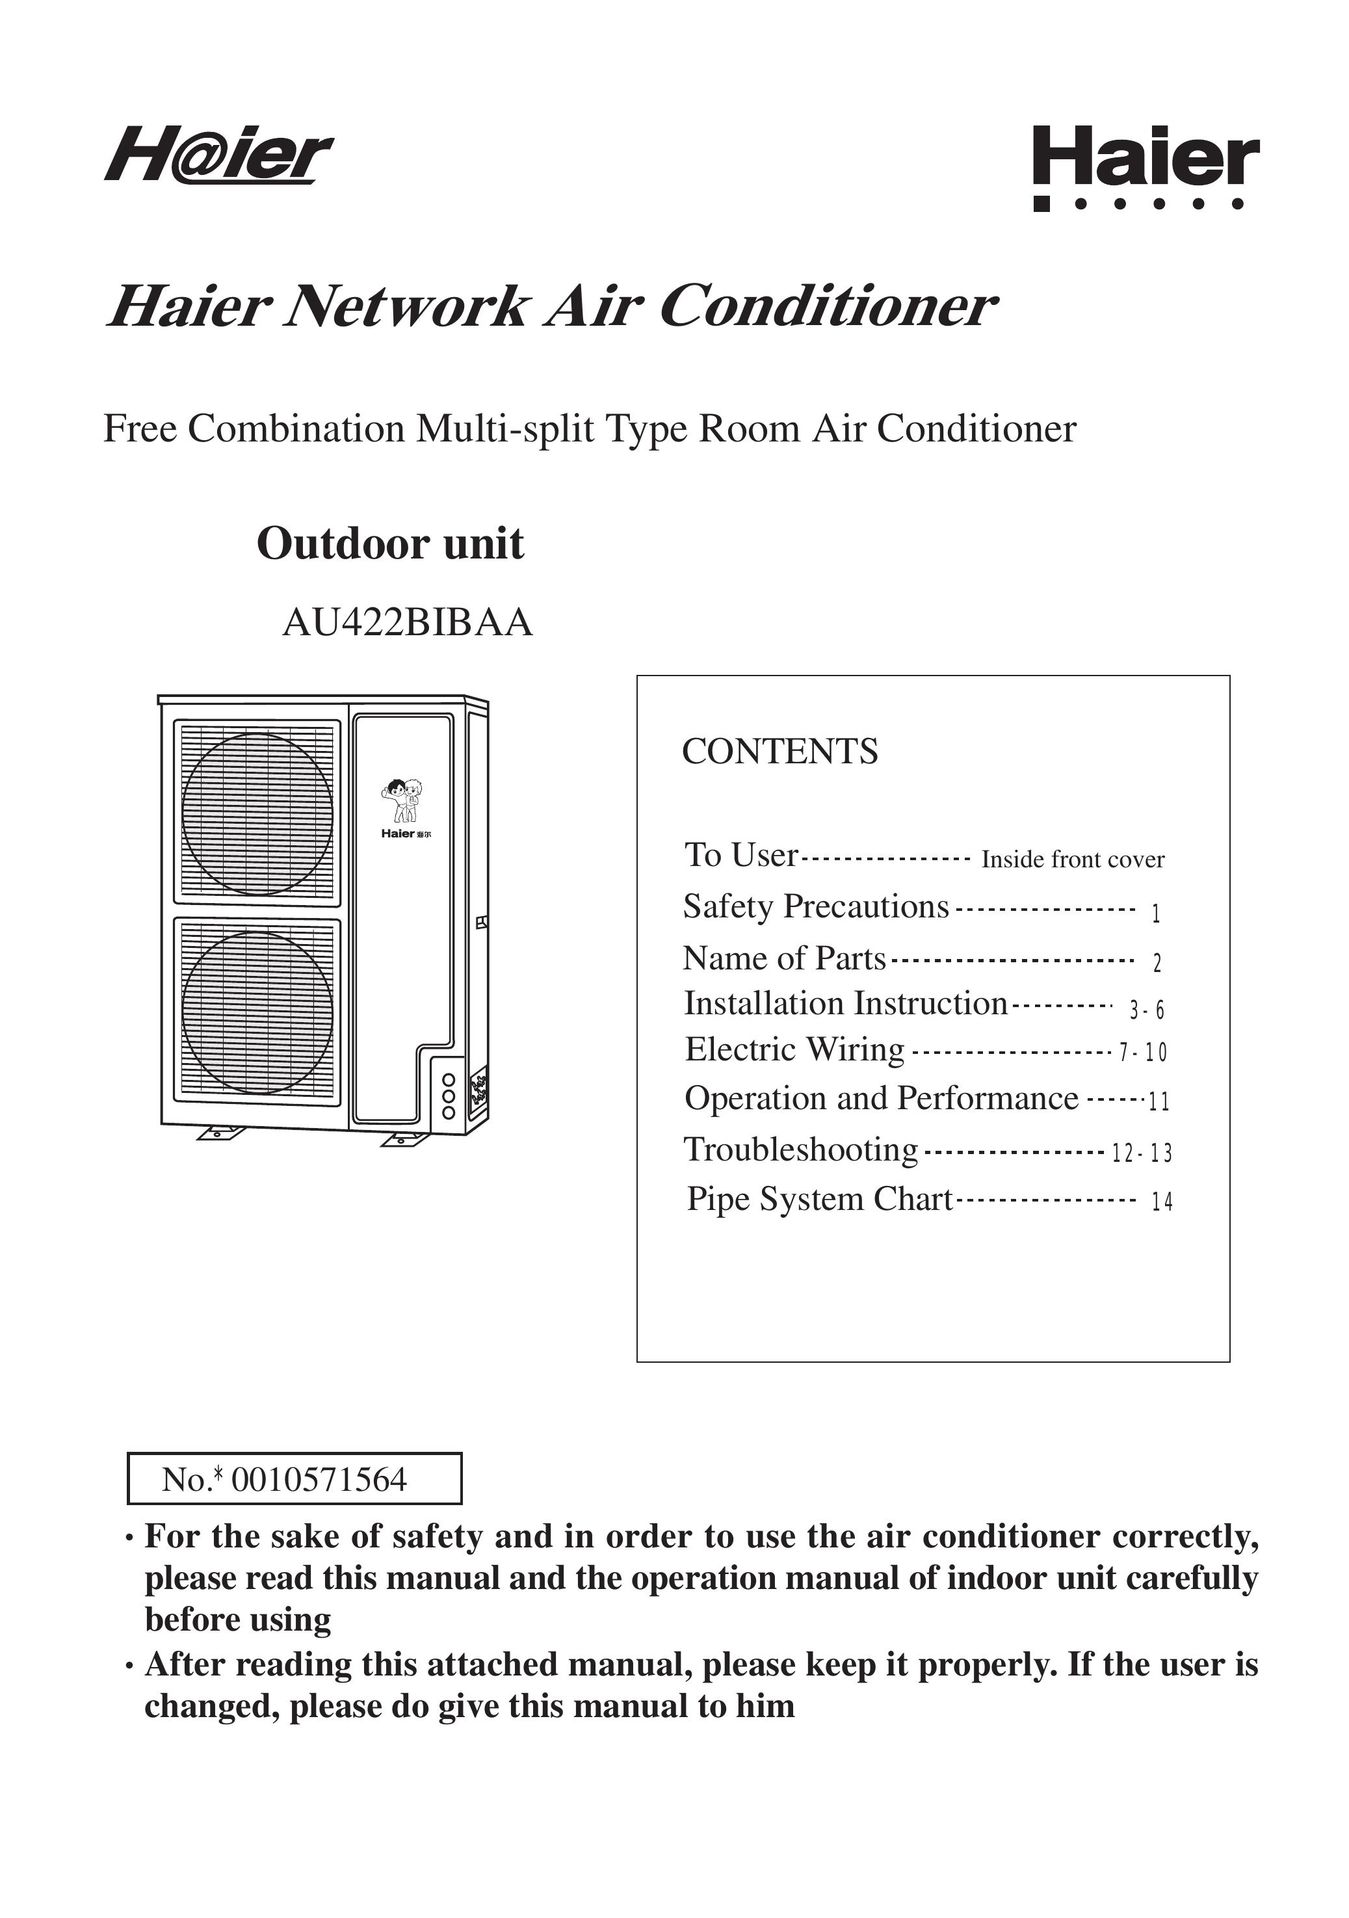 Haier 0010571564 Air Conditioner User Manual